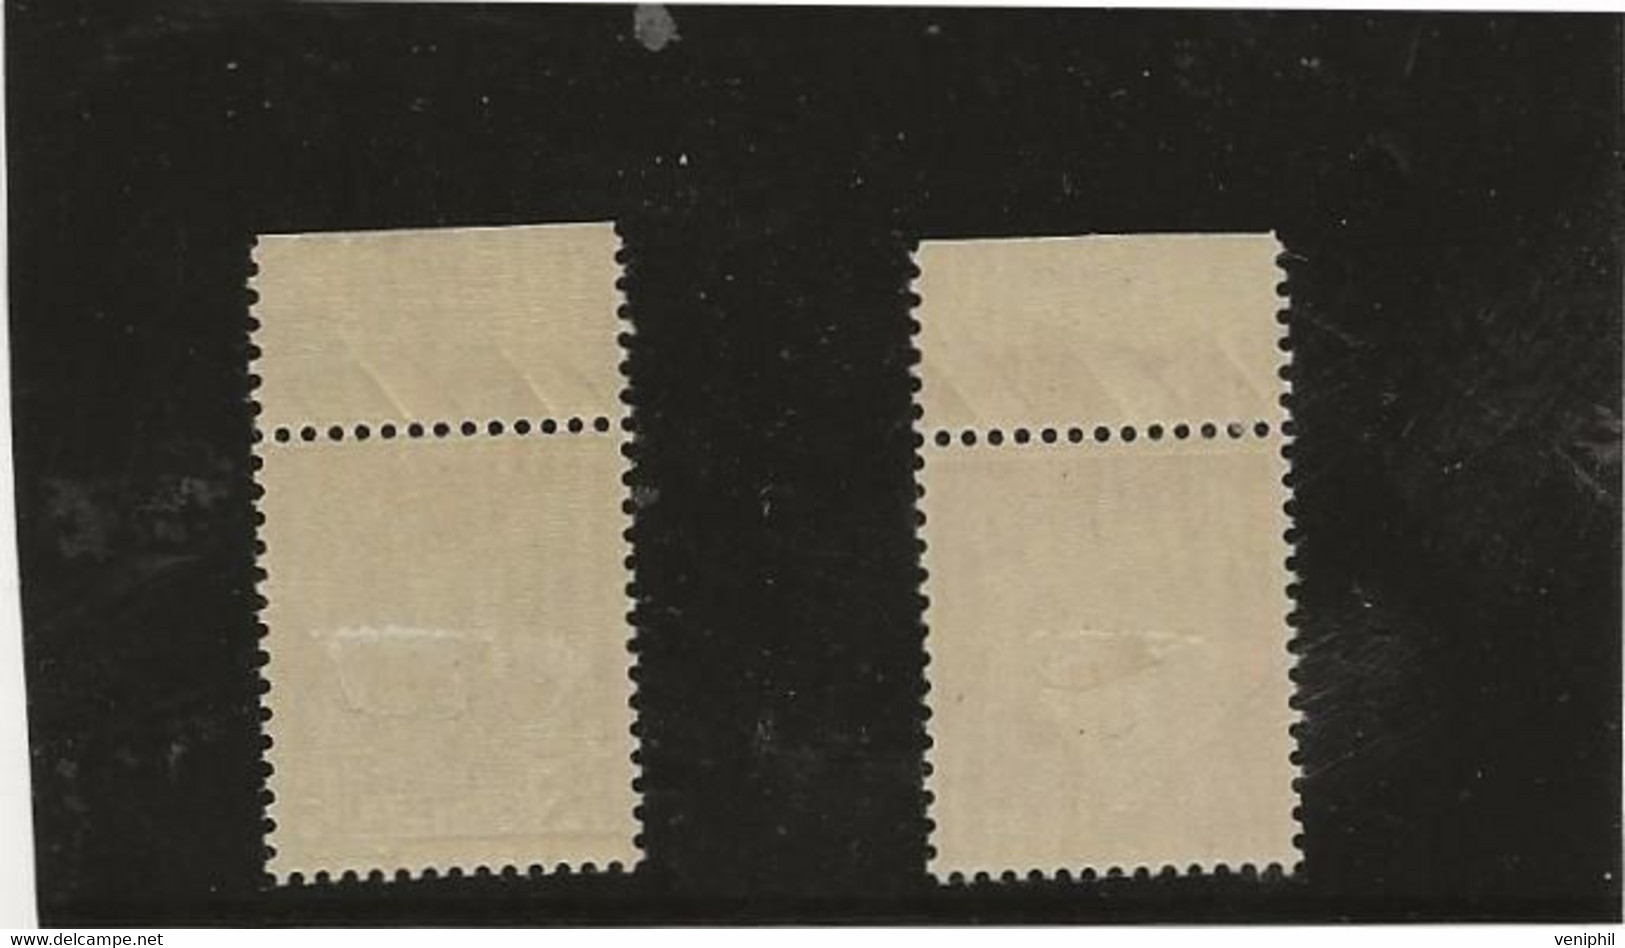 TIMBRES N° 291-292 NEUF BORD DE FEUILLE -PETITE TRACE DE CHARNIERE -ANNEE 1933 -COTE : 50 € - Unused Stamps